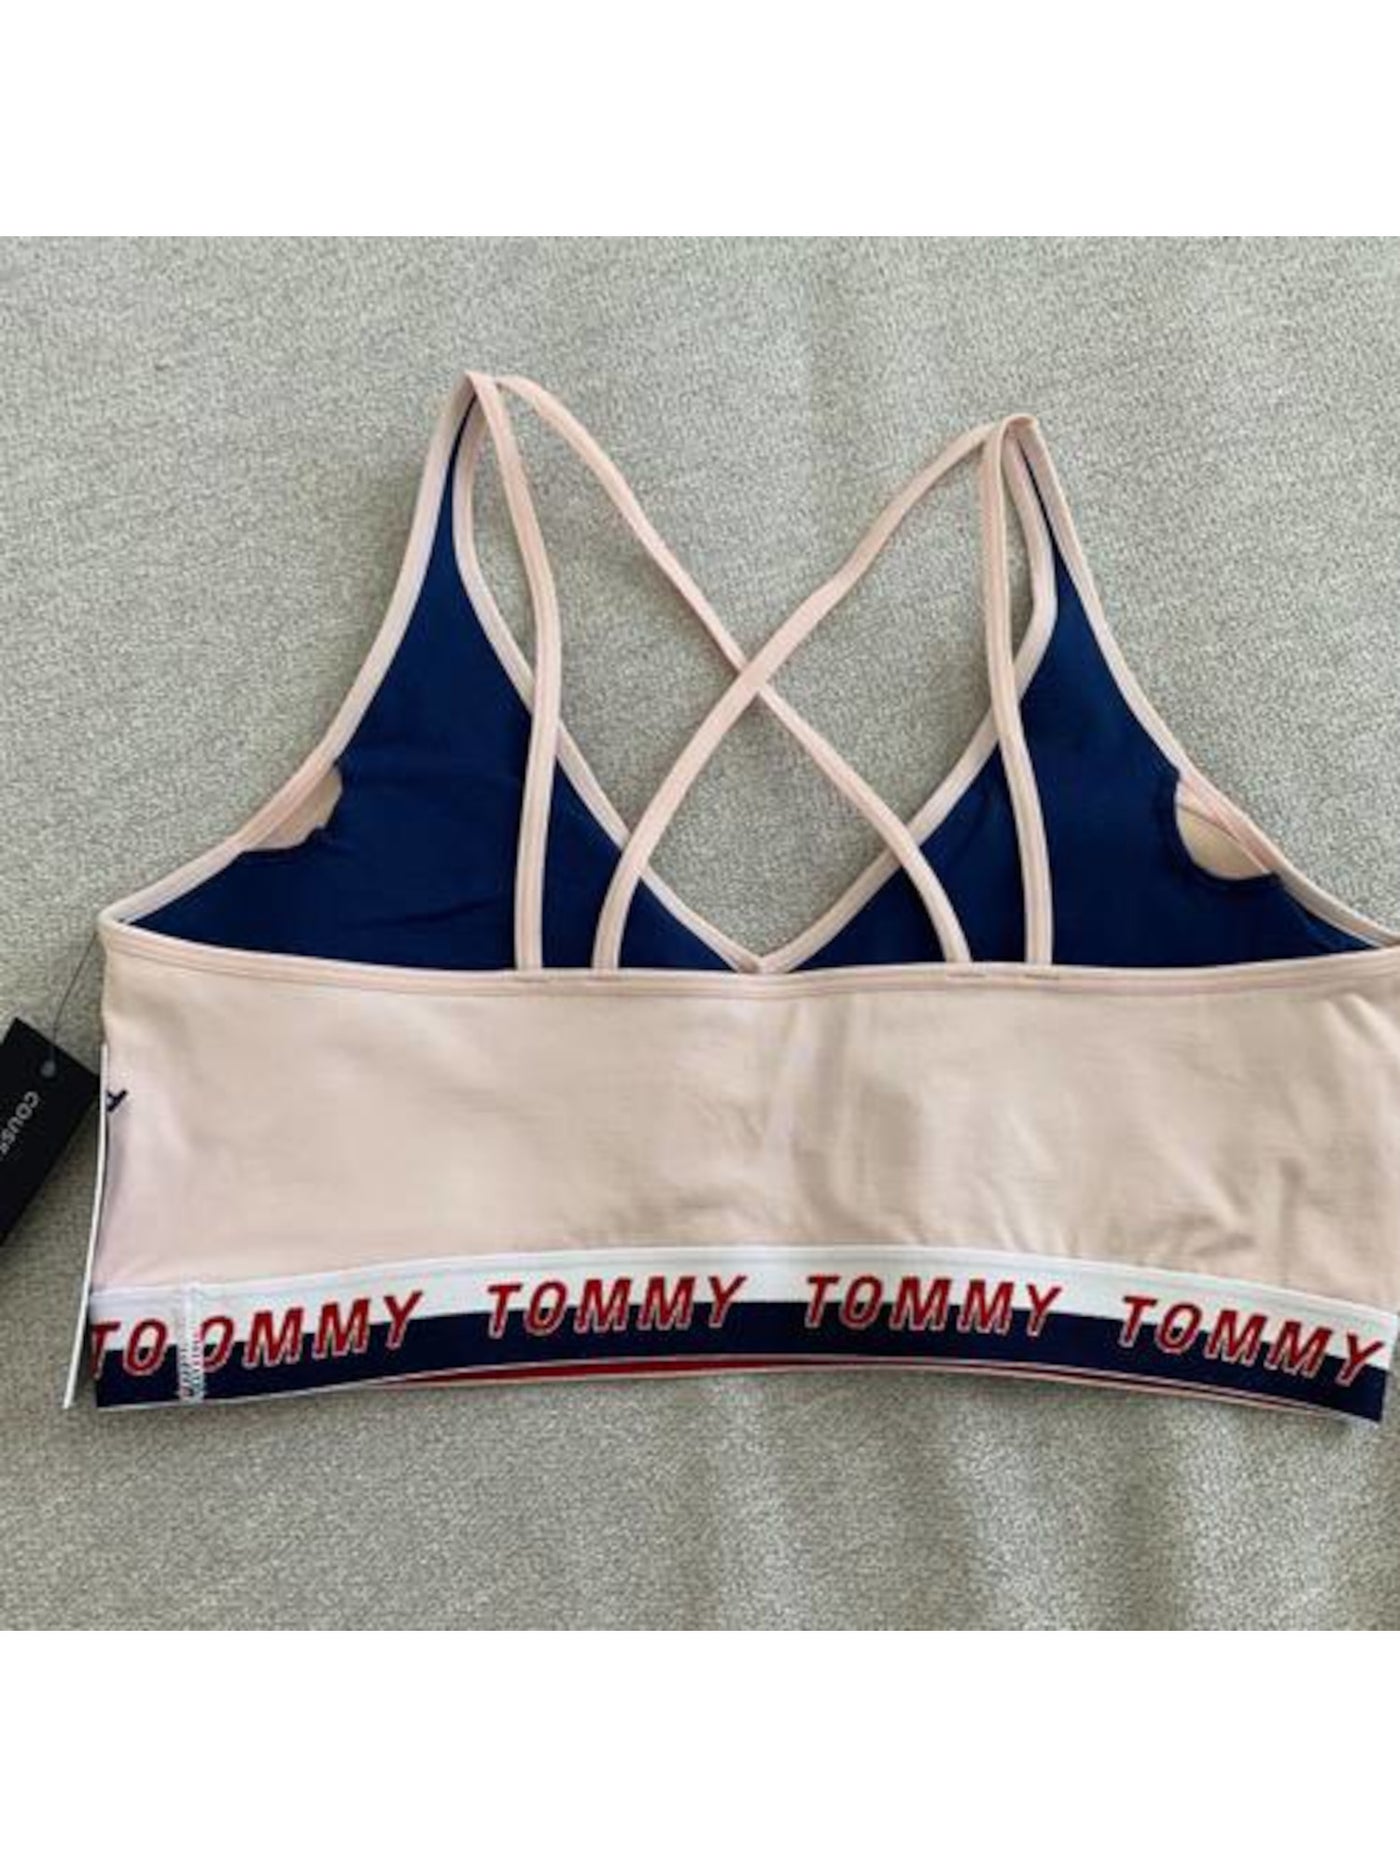 TOMMY HILFIGER SPORT Intimates Pink Low Impact Seamless Removable Cups Sports Bra XS